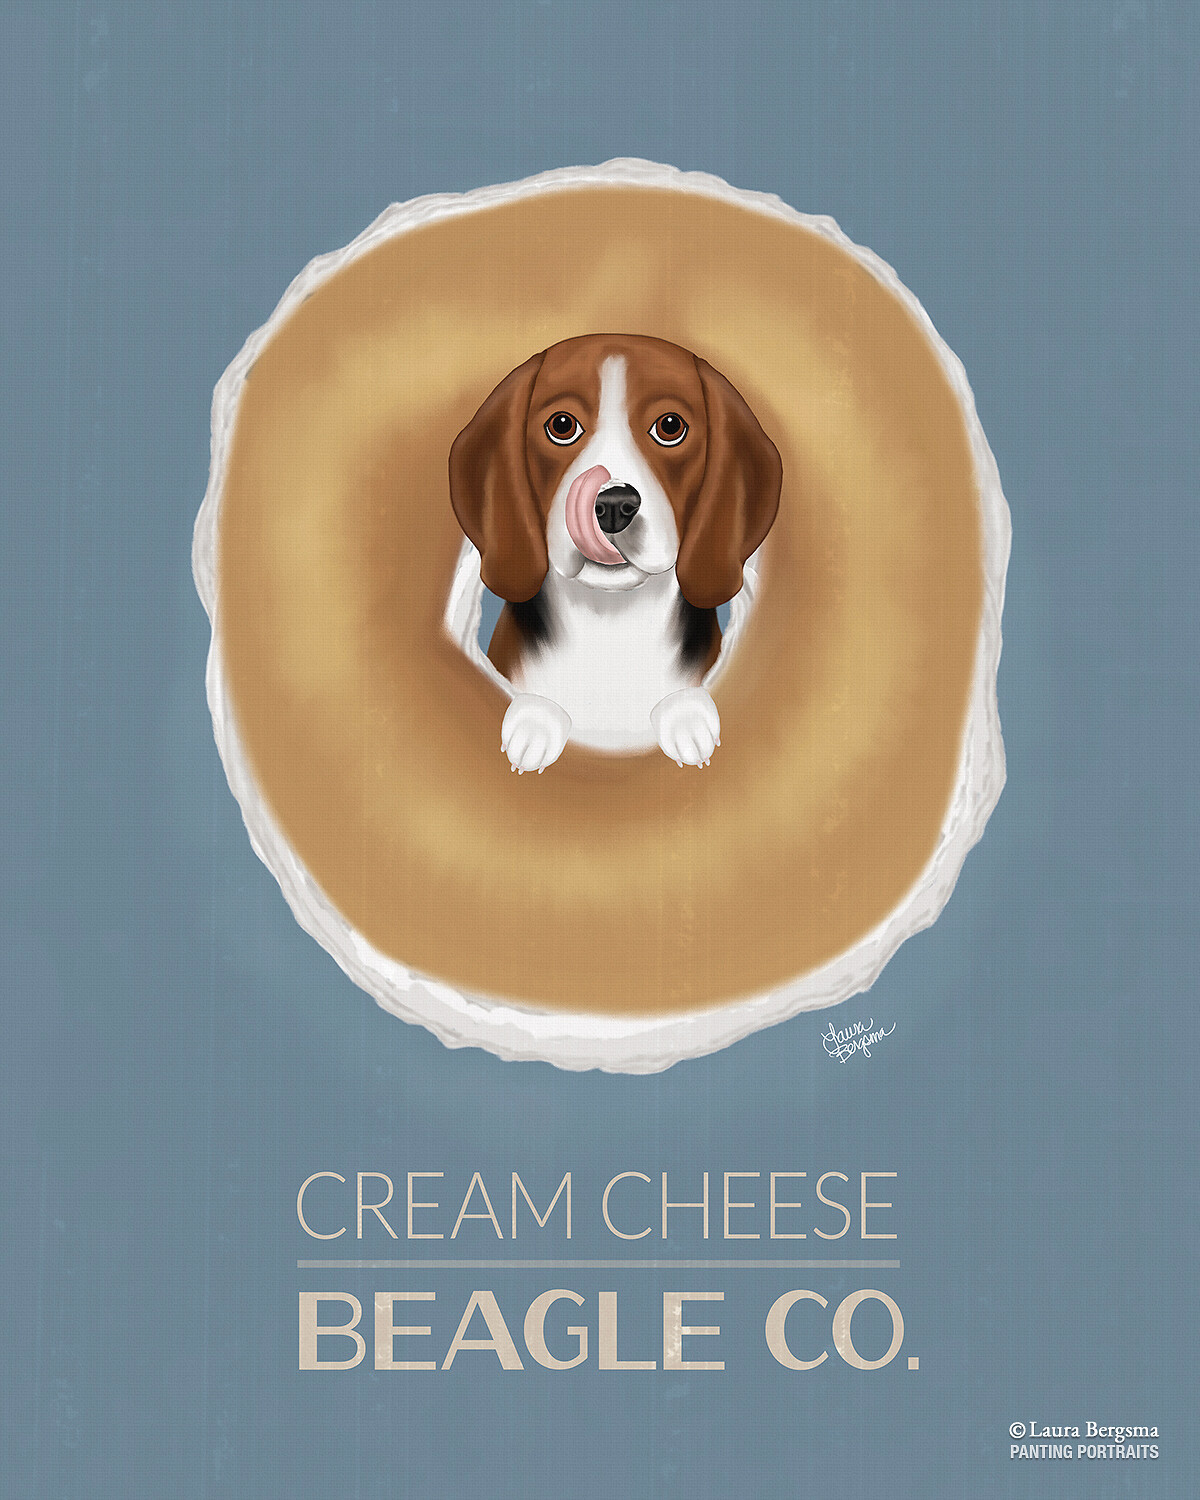 Poster of a Beagle in a cream cheese bagel.